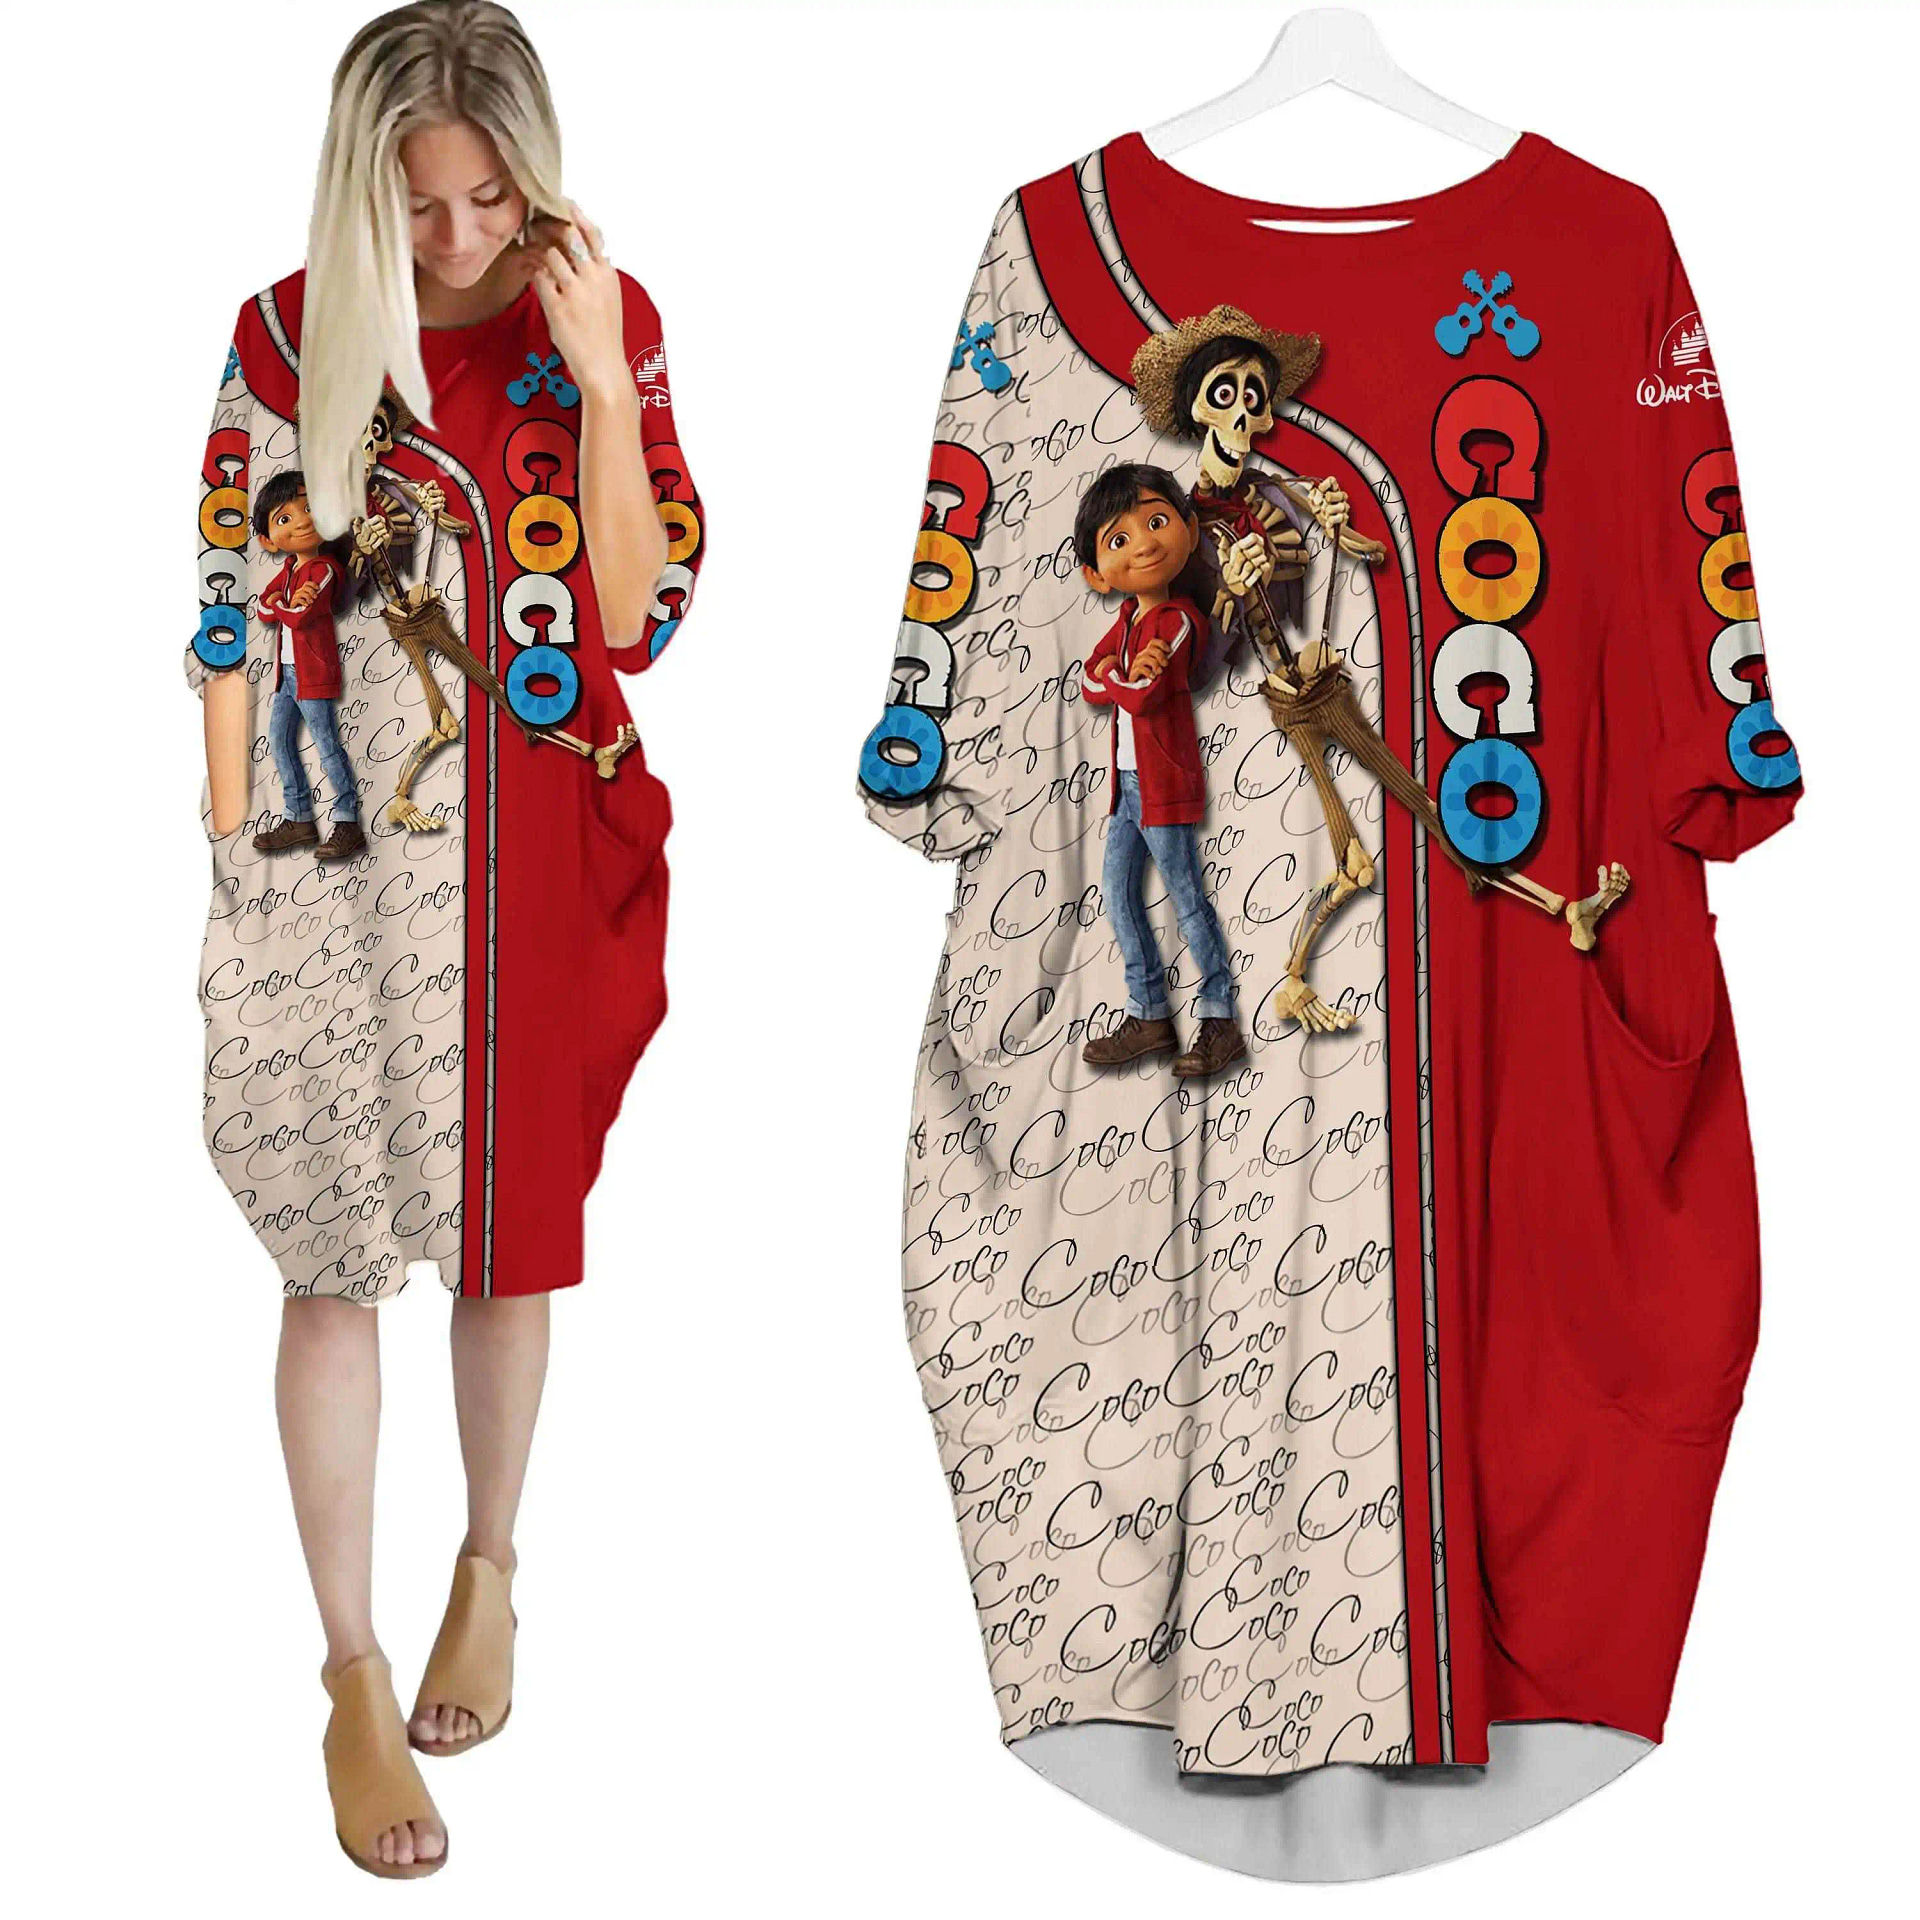 Red Coco Musical Pattern Disney Cartoon Summer Vacation Outfits Women Girls Batwing Pocket Dress